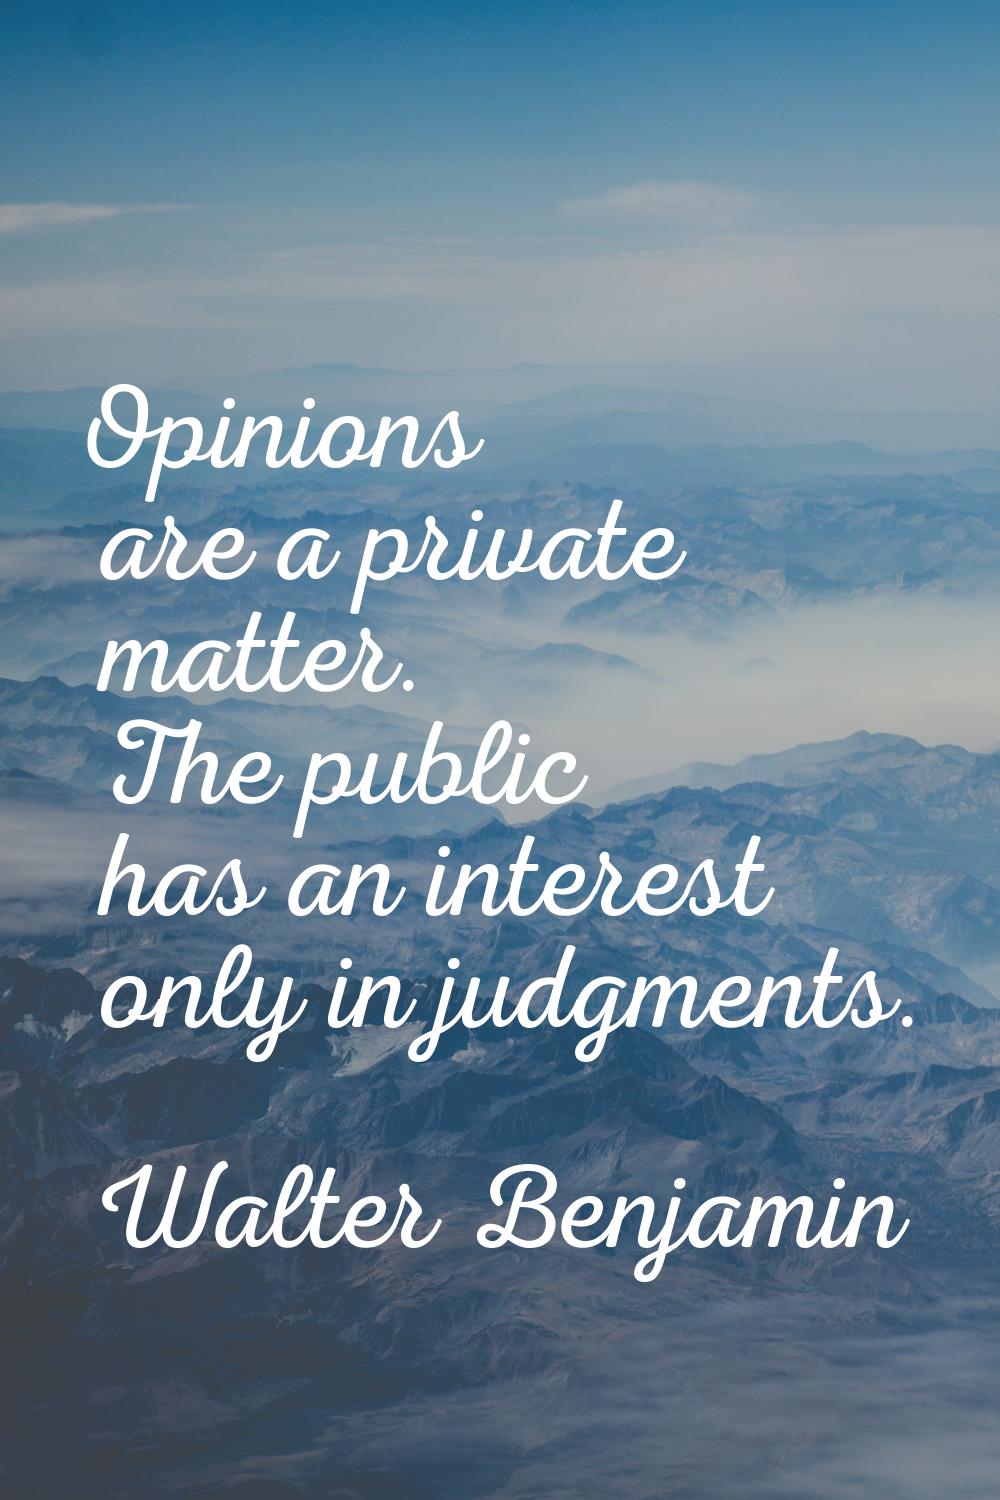 Opinions are a private matter. The public has an interest only in judgments.